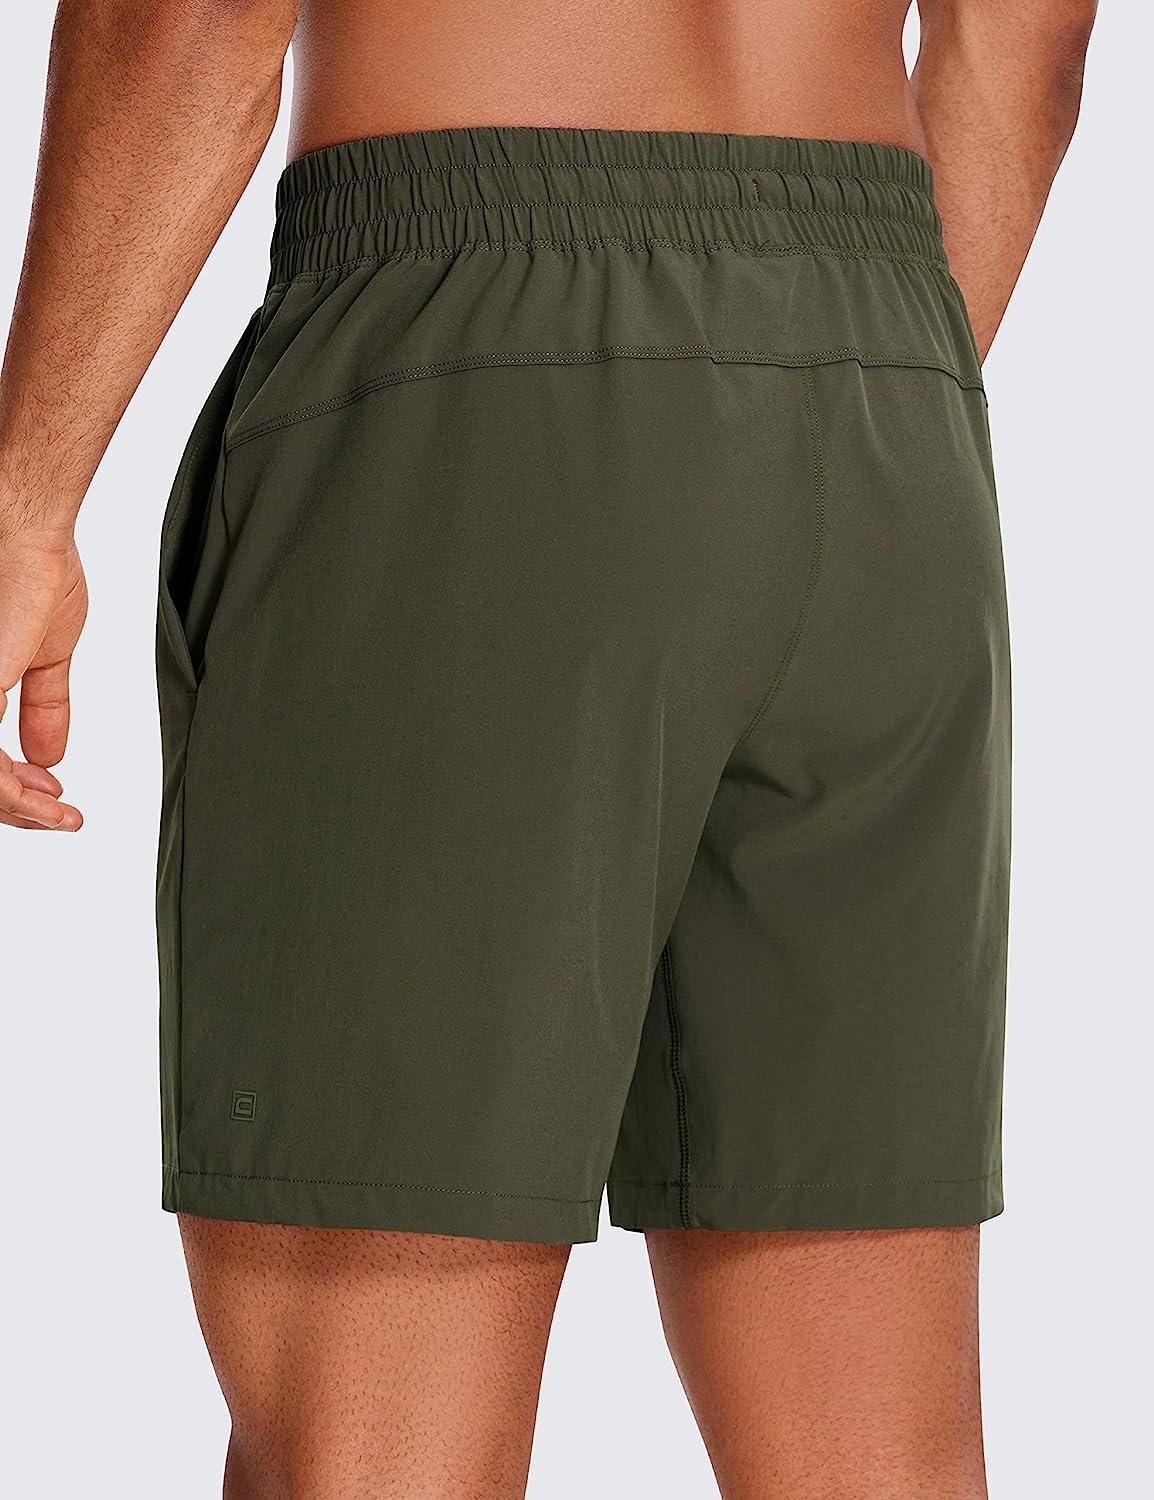 CRZ YOGA Men's 2 in 1 Running Shorts with Liner - 7''/9 Quick Dry Workout  Sports Athletic Shorts with Pockets 7 inches Large Dark Olive